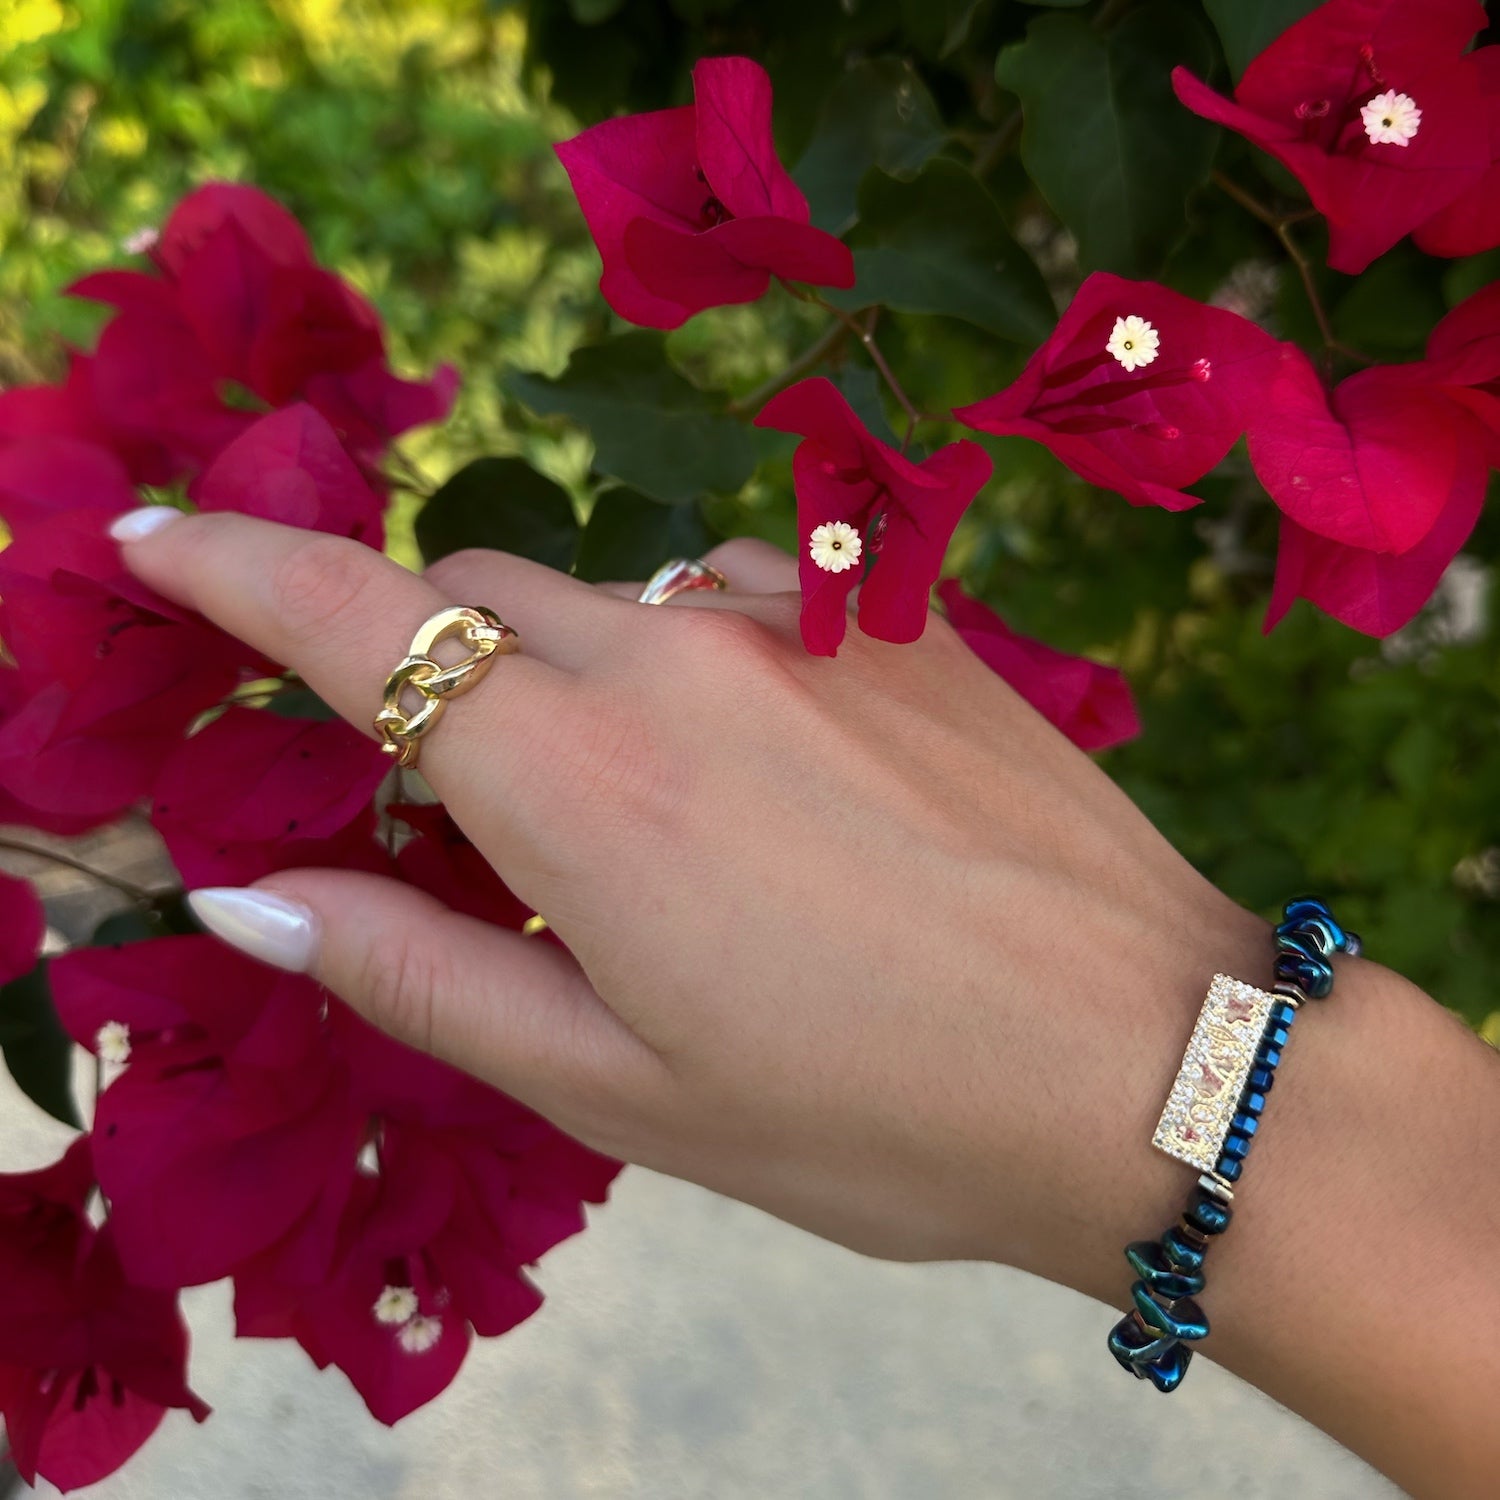 The hand model showcases the elegance and symbolism of the Protection & Luck Blue Hematite Bracelet, radiating confidence and positive energy.